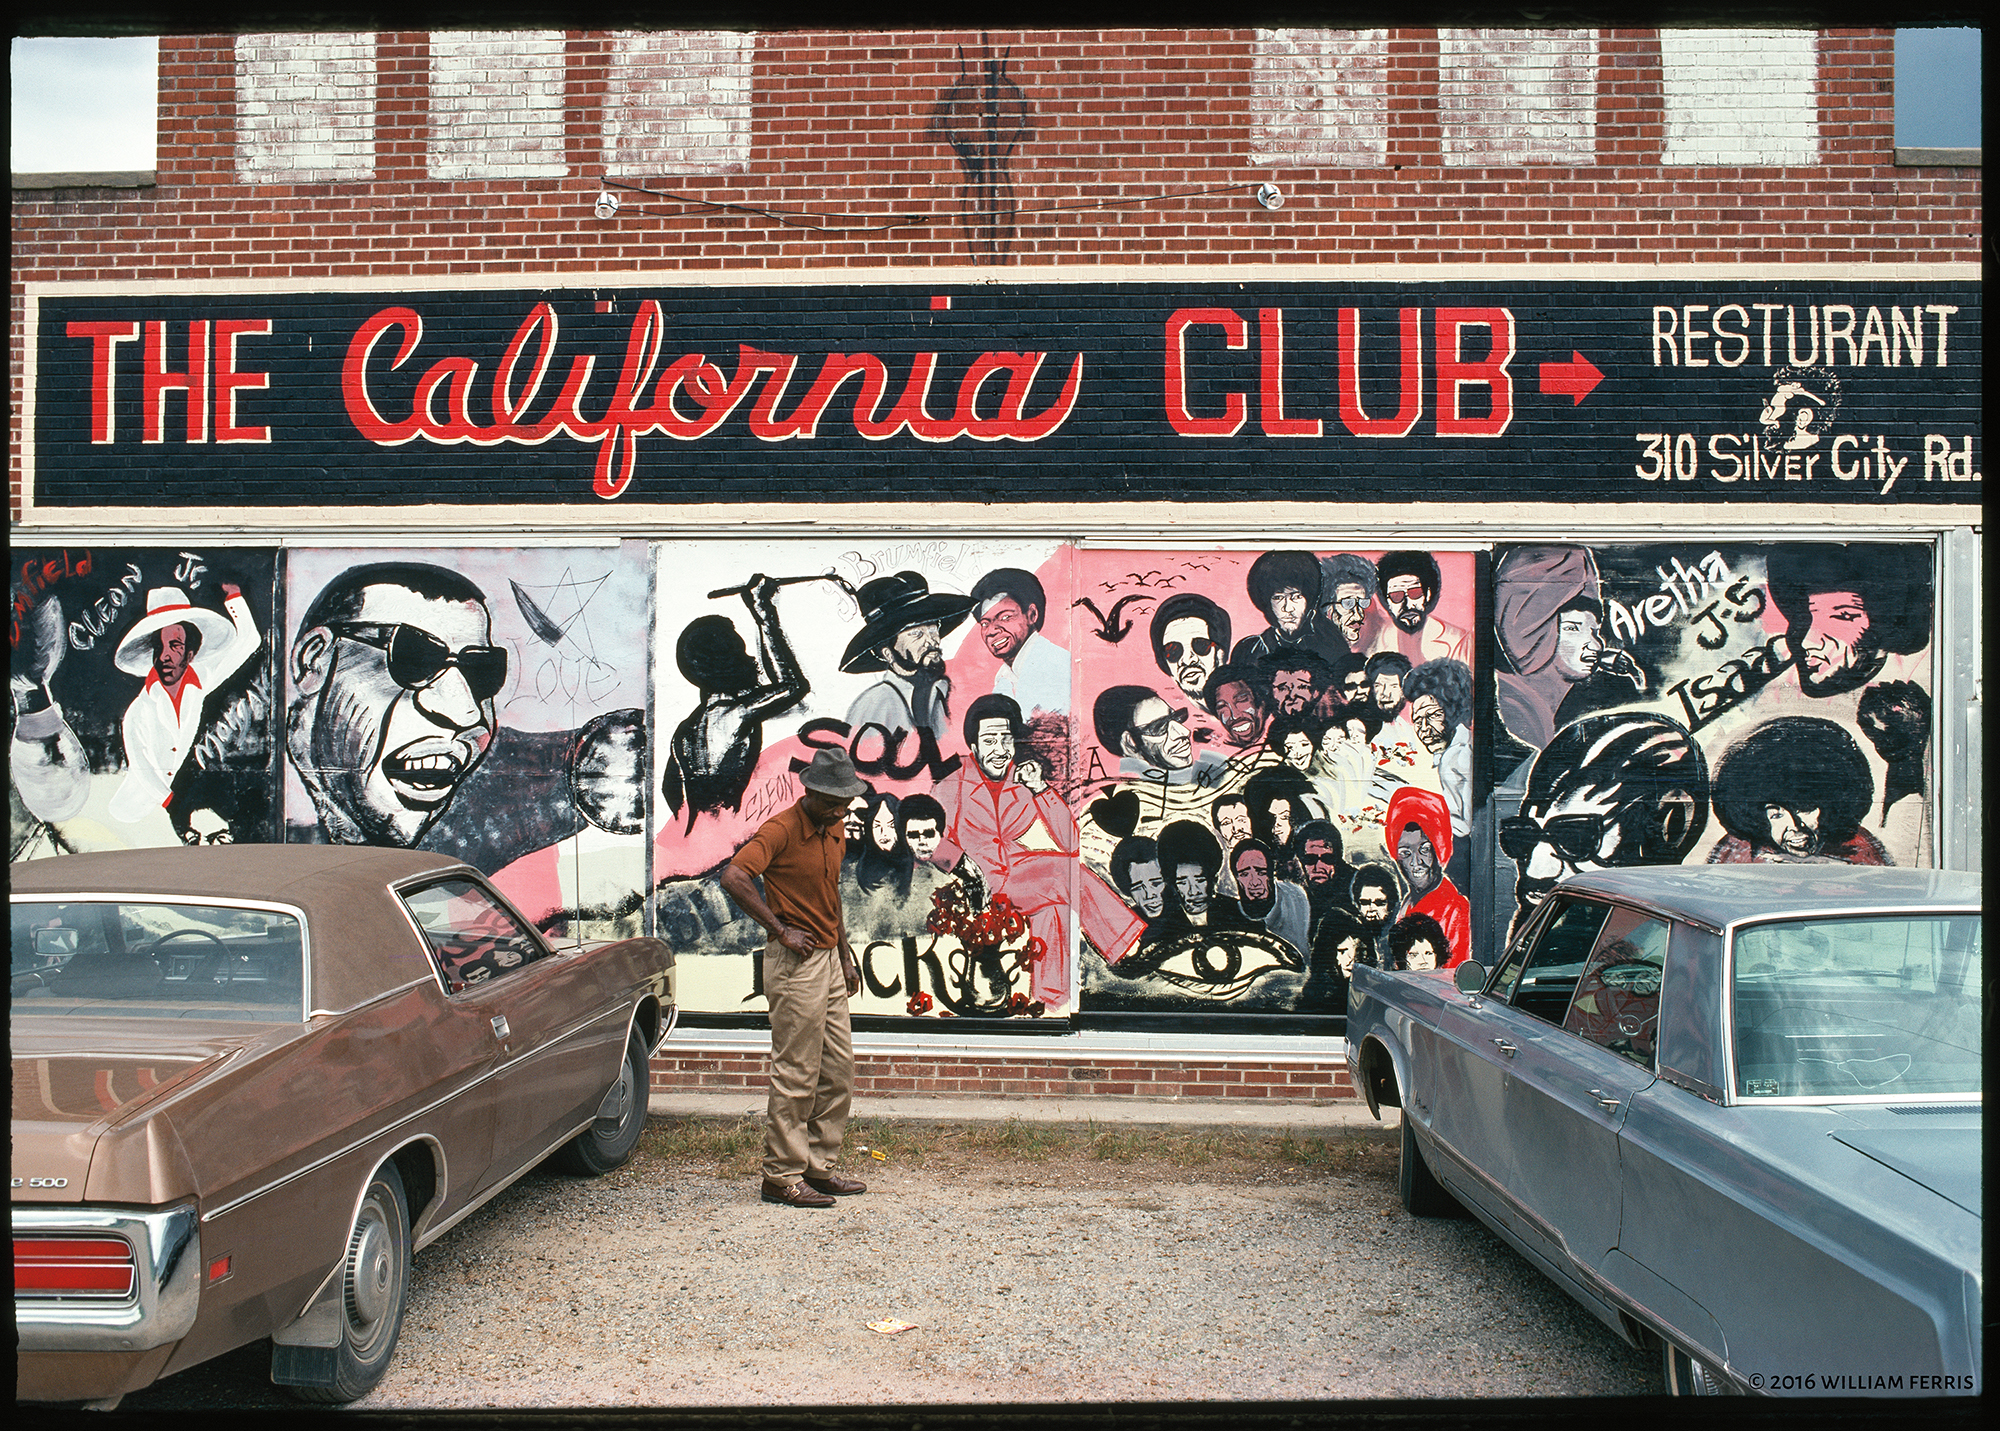 A man stands between two cars outside the California Club, which is decorated with a mural